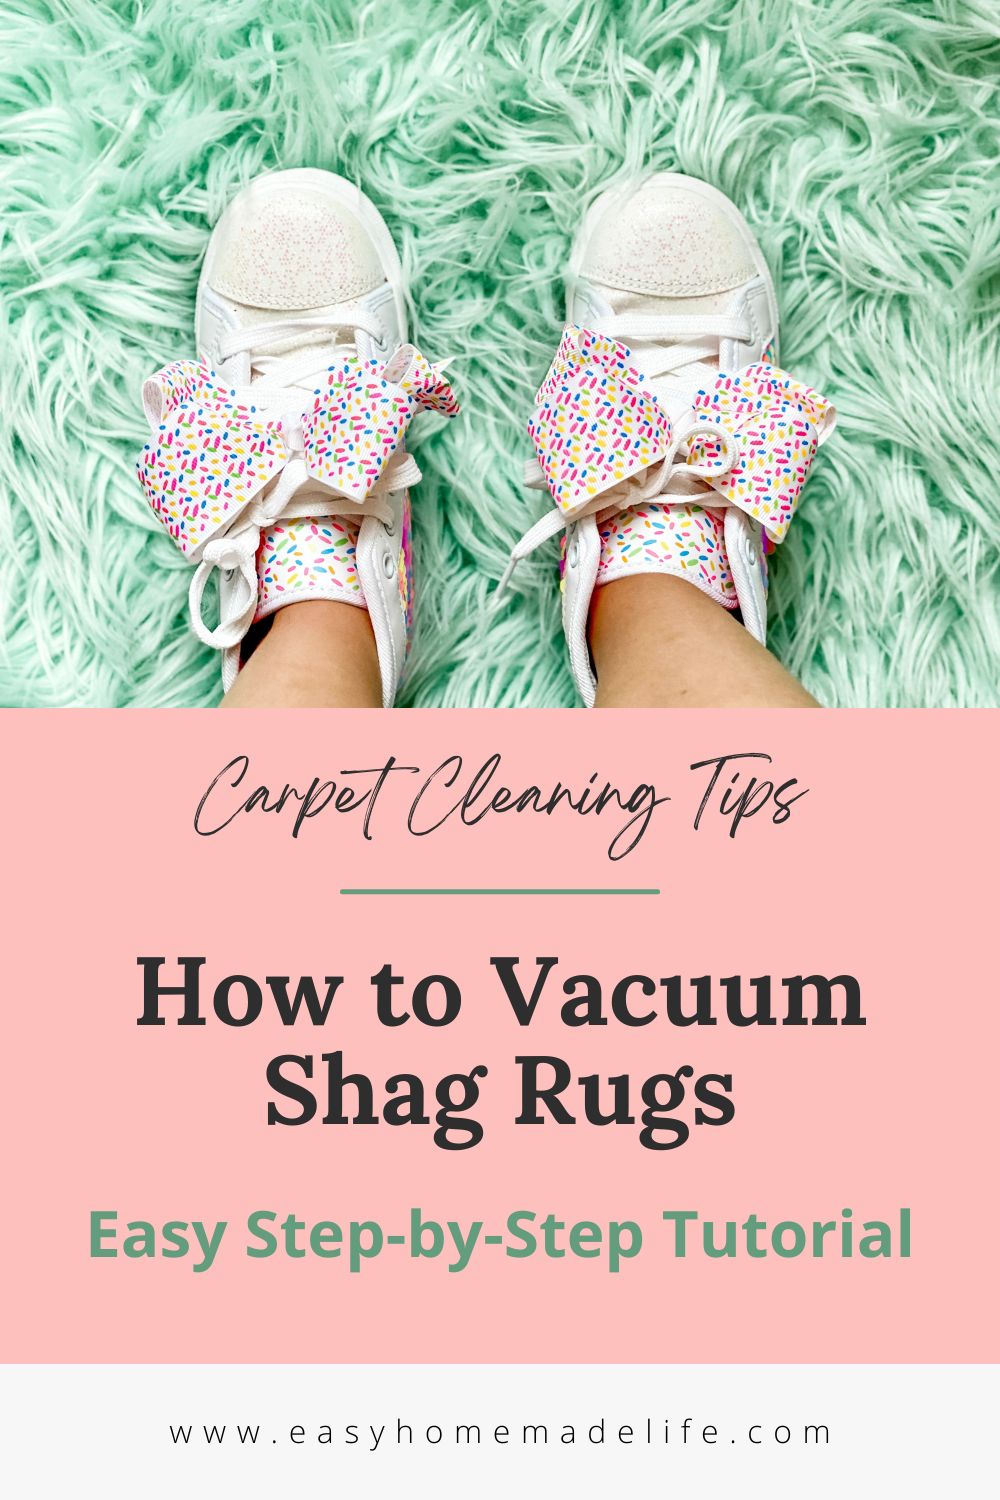 Carpet cleaning tips. How to vacuum shag rugs. Easy step-by-step tutorial.